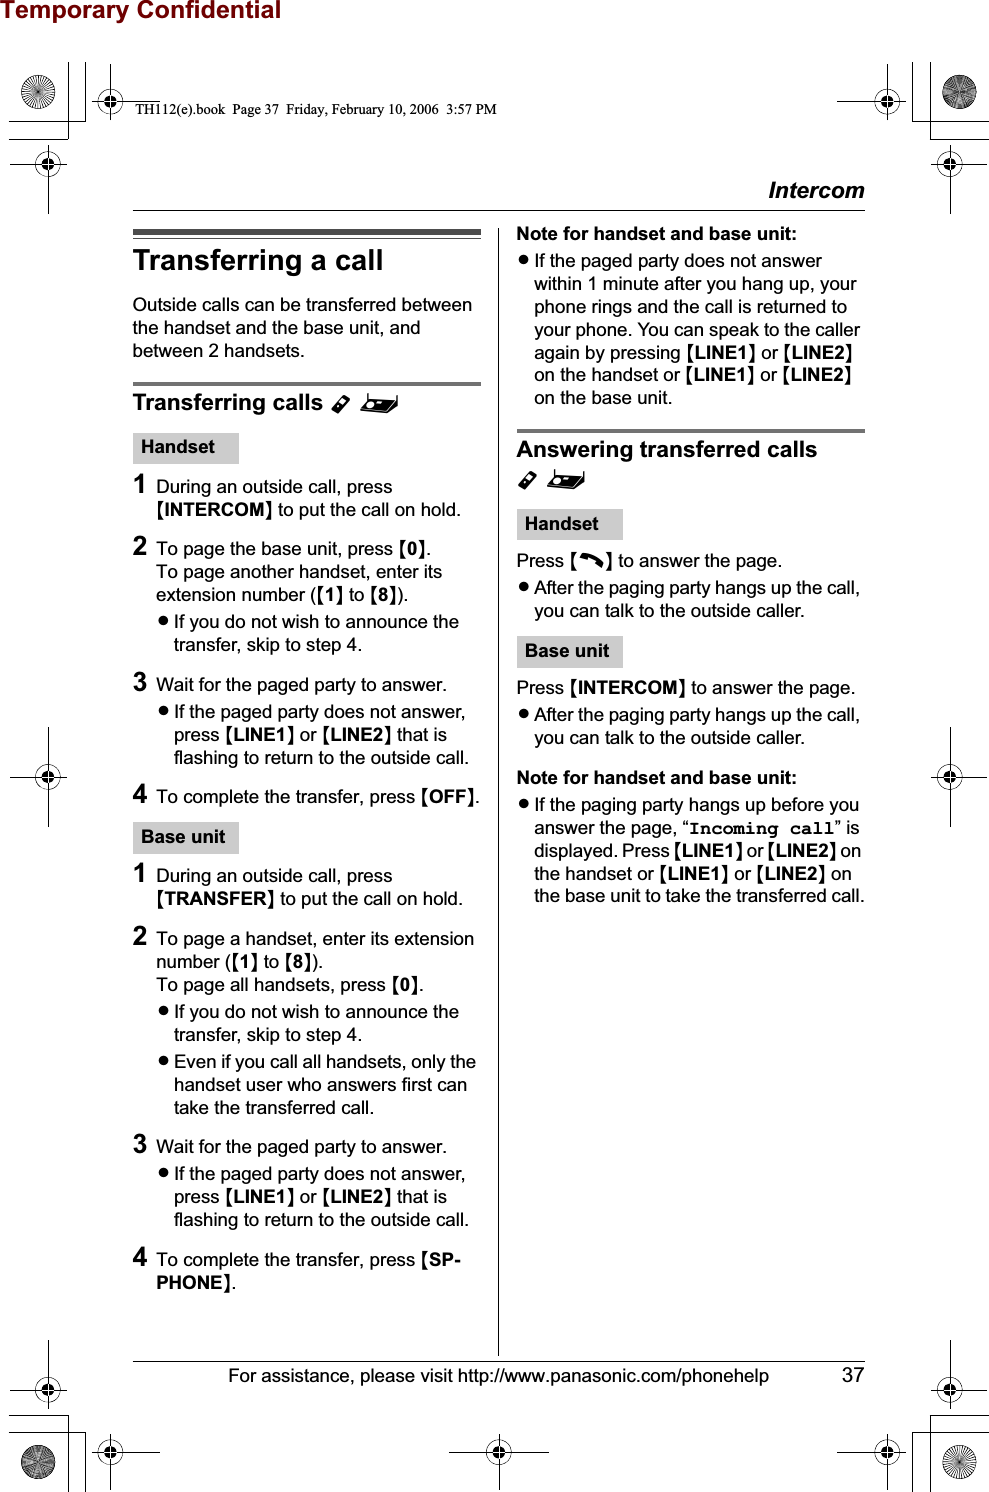 Temporary ConfidentialIntercomFor assistance, please visit http://www.panasonic.com/phonehelp 37Transferring a callOutside calls can be transferred between the handset and the base unit, and between 2 handsets.Transferring calls Y^1During an outside call, press {INTERCOM} to put the call on hold.2To page the base unit, press {0}.To page another handset, enter its extension number ({1} to {8}).LIf you do not wish to announce the transfer, skip to step 4.3Wait for the paged party to answer.LIf the paged party does not answer, press {LINE1} or {LINE2} that is flashing to return to the outside call.4To complete the transfer, press {OFF}.1During an outside call, press {TRANSFER} to put the call on hold.2To page a handset, enter its extension number ({1} to {8}).To page all handsets, press {0}.LIf you do not wish to announce the transfer, skip to step 4.LEven if you call all handsets, only the handset user who answers first can take the transferred call.3Wait for the paged party to answer.LIf the paged party does not answer, press {LINE1} or {LINE2} that is flashing to return to the outside call.4To complete the transfer, press {SP-PHONE}.Note for handset and base unit:LIf the paged party does not answer within 1 minute after you hang up, your phone rings and the call is returned to your phone. You can speak to the caller again by pressing {LINE1} or {LINE2}on the handset or {LINE1} or {LINE2}on the base unit.Answering transferred calls Y^Press {C} to answer the page.LAfter the paging party hangs up the call, you can talk to the outside caller.Press {INTERCOM} to answer the page.LAfter the paging party hangs up the call, you can talk to the outside caller.Note for handset and base unit:LIf the paging party hangs up before you answer the page, “Incoming call” is displayed. Press {LINE1} or {LINE2} on the handset or {LINE1} or {LINE2} on the base unit to take the transferred call.HandsetBase unitHandsetBase unitTH112(e).book  Page 37  Friday, February 10, 2006  3:57 PM